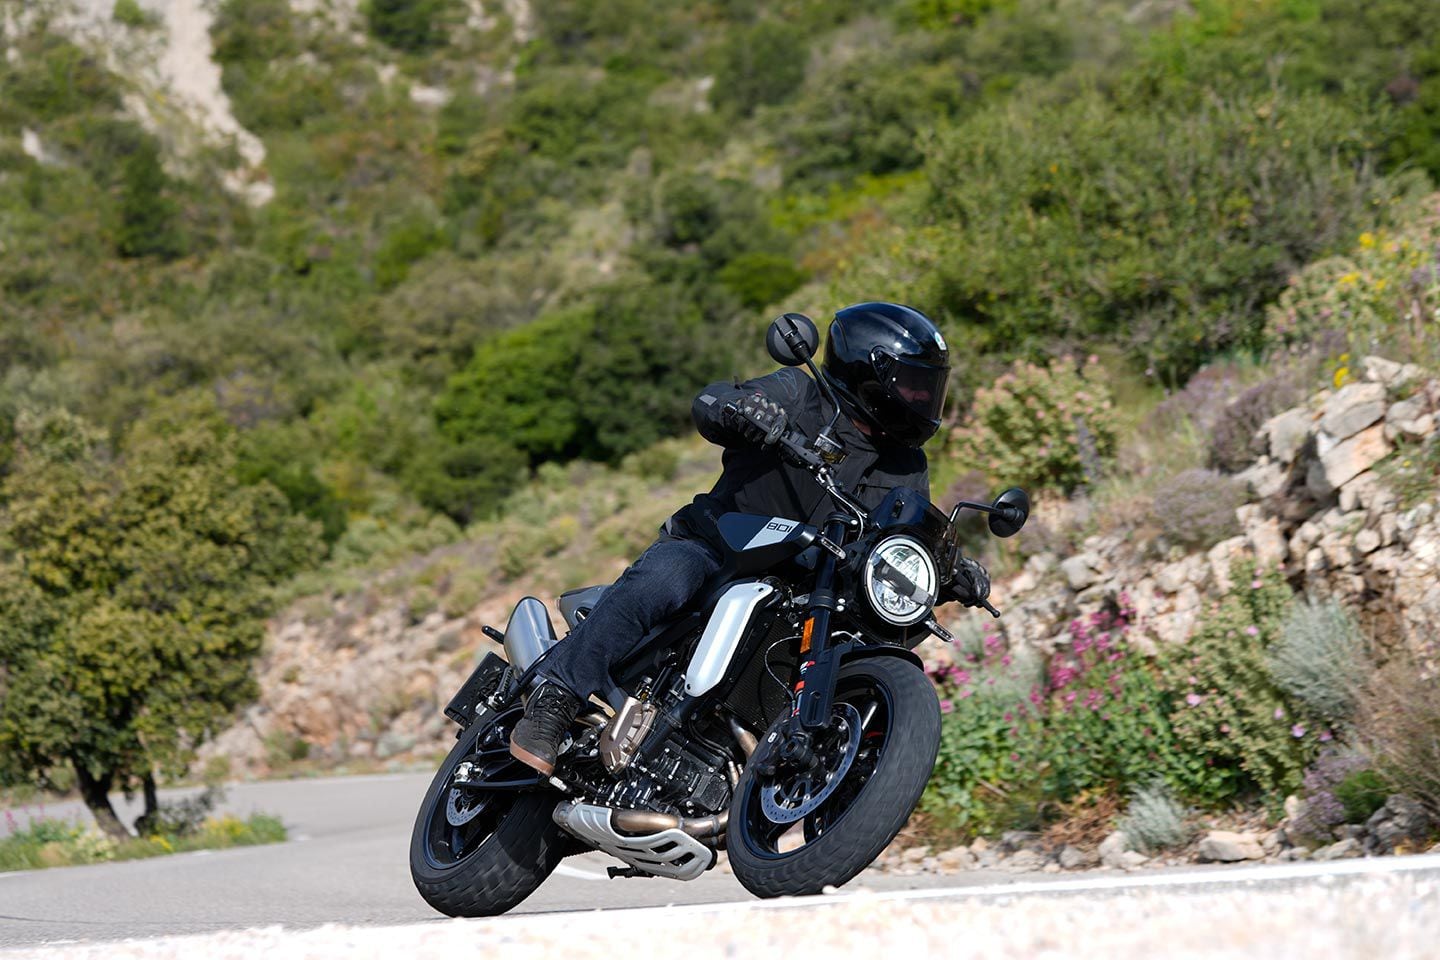 Handling is crisp and light, yet the bike offers excellent stability.